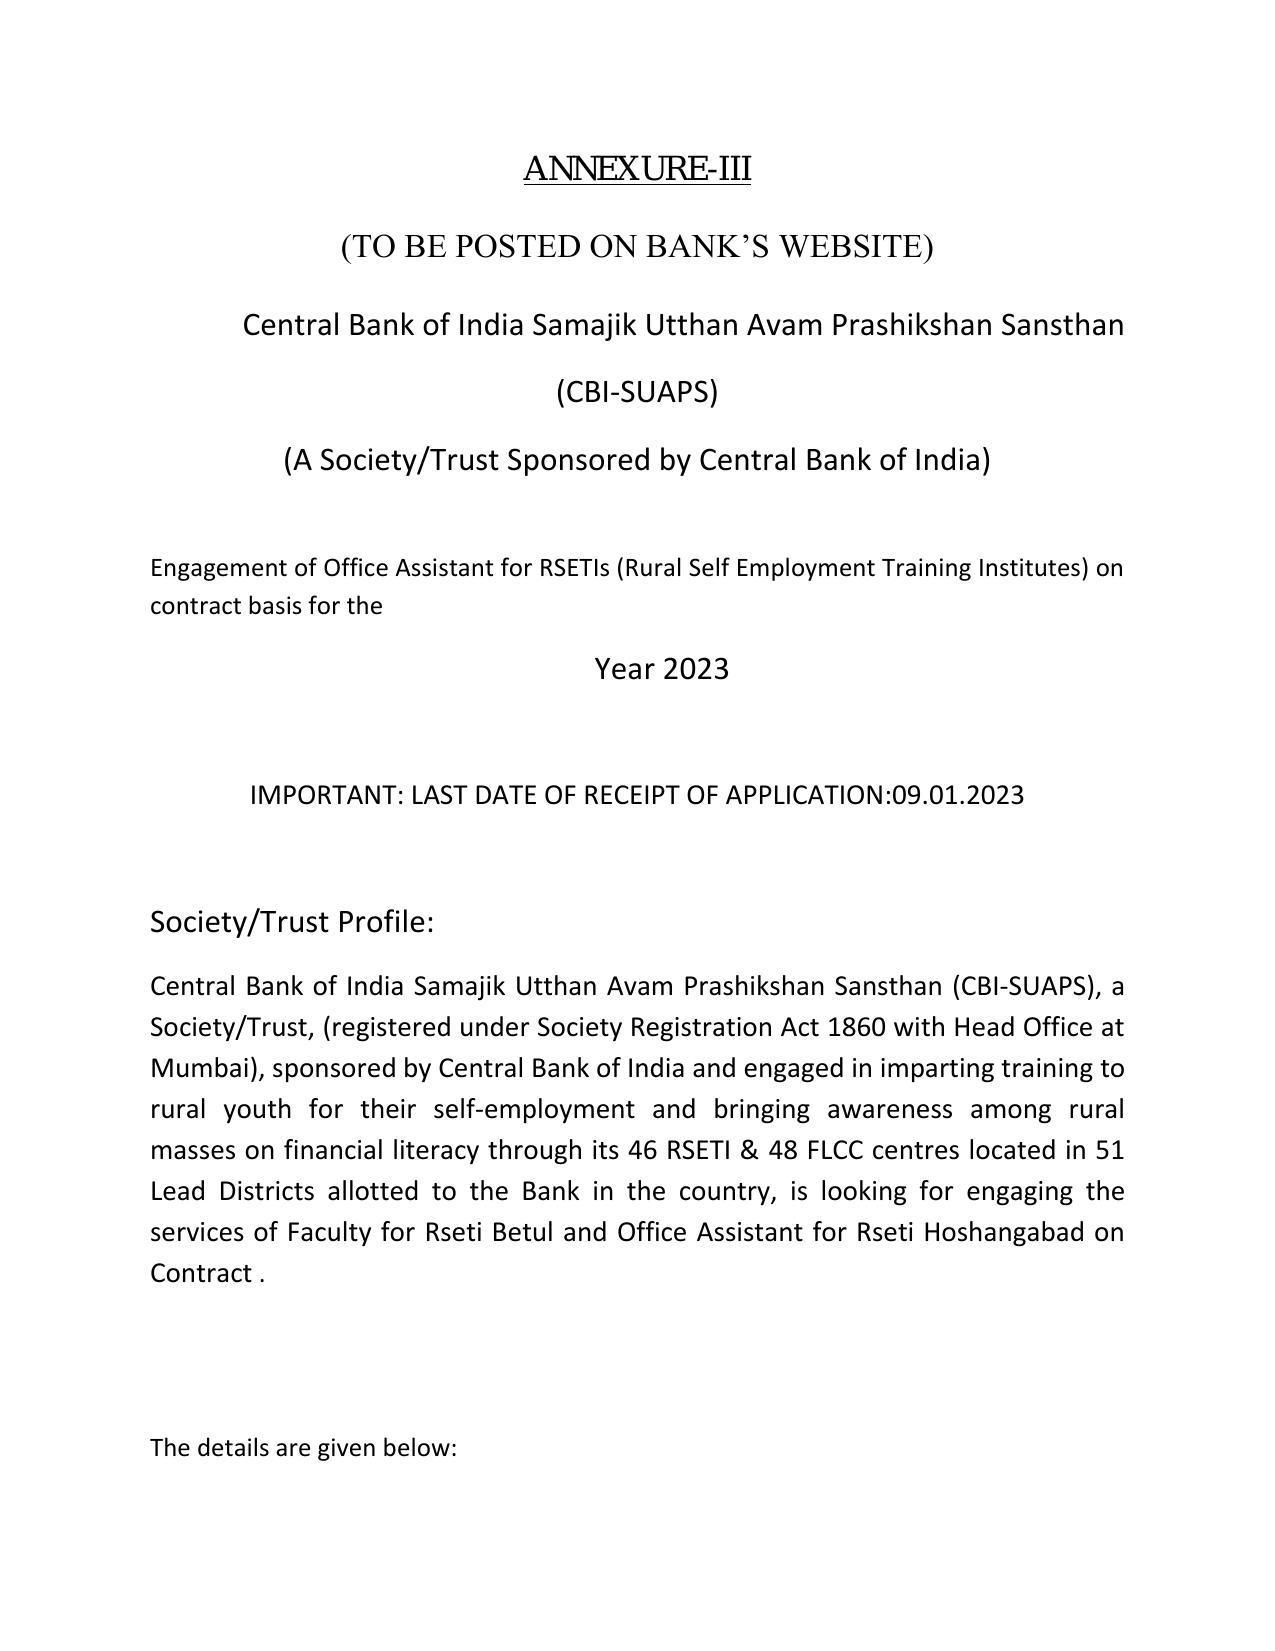 Central Bank of India Hoshangabad Invites Application for Office Assistant Recruitment 2022 - Page 1